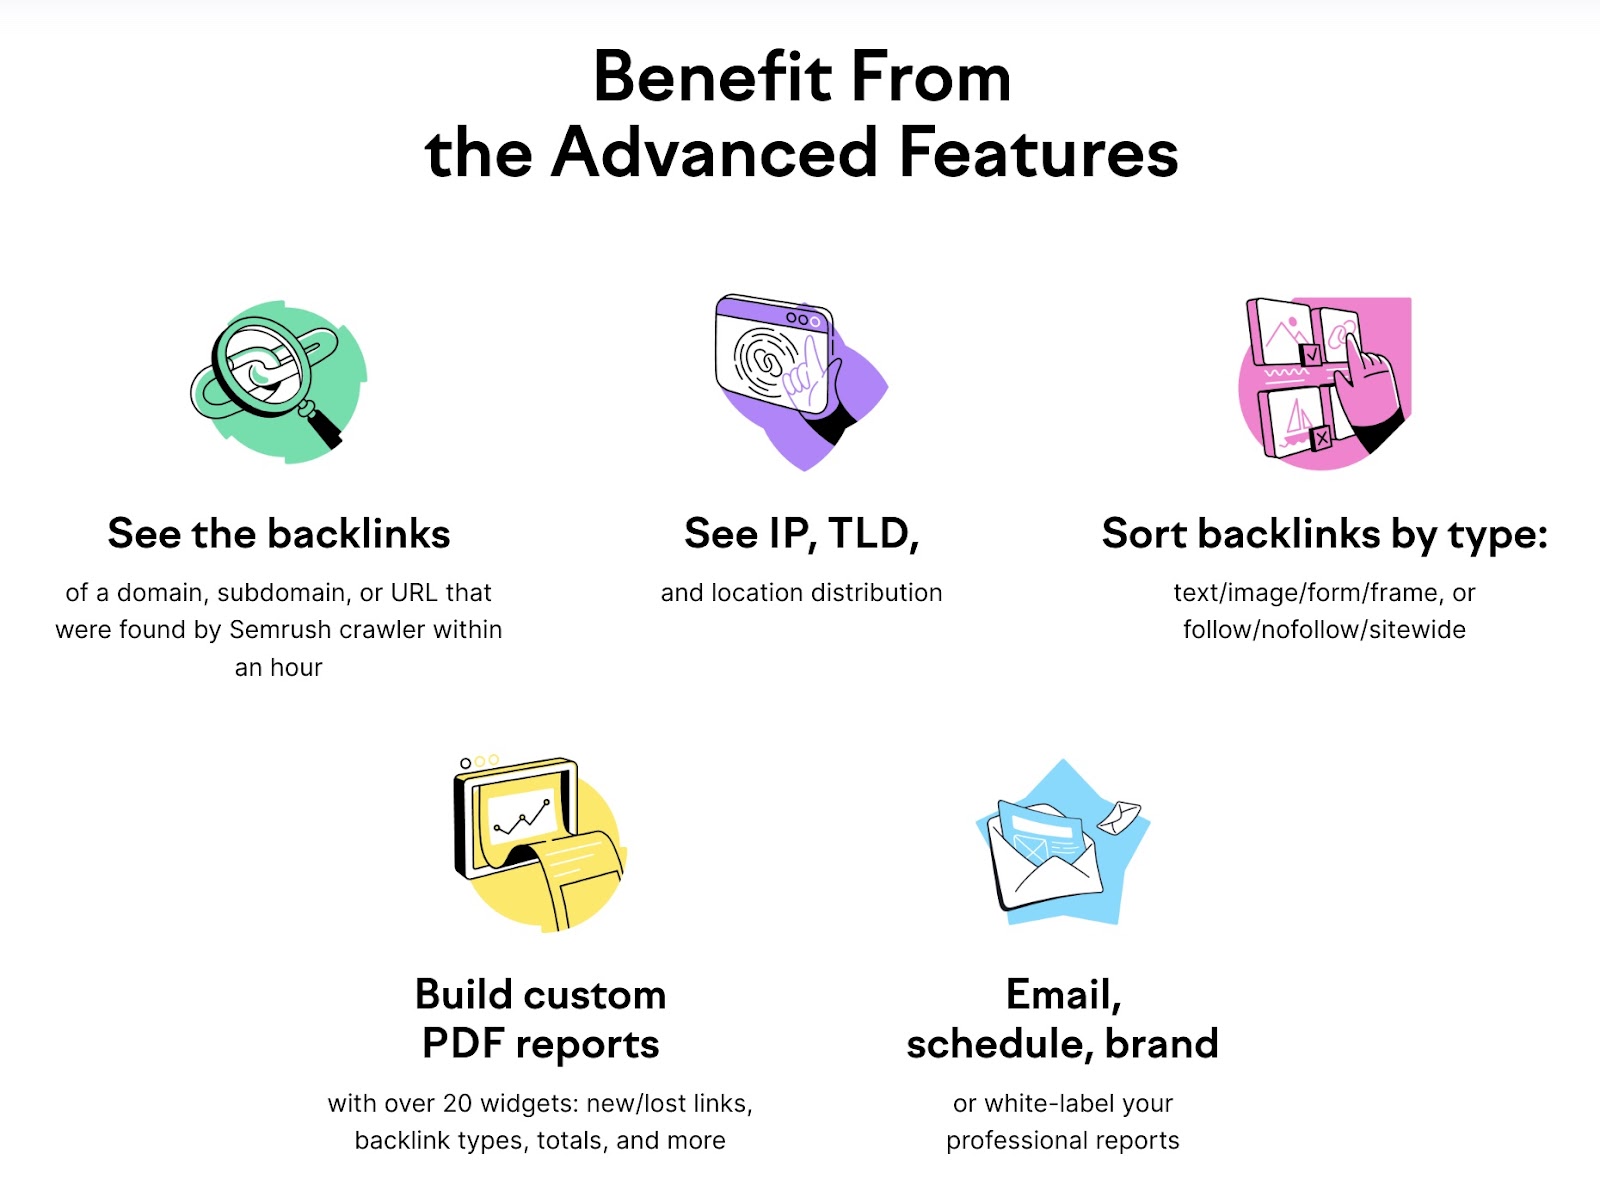 "Benefits from the advanced features" section of a landing page